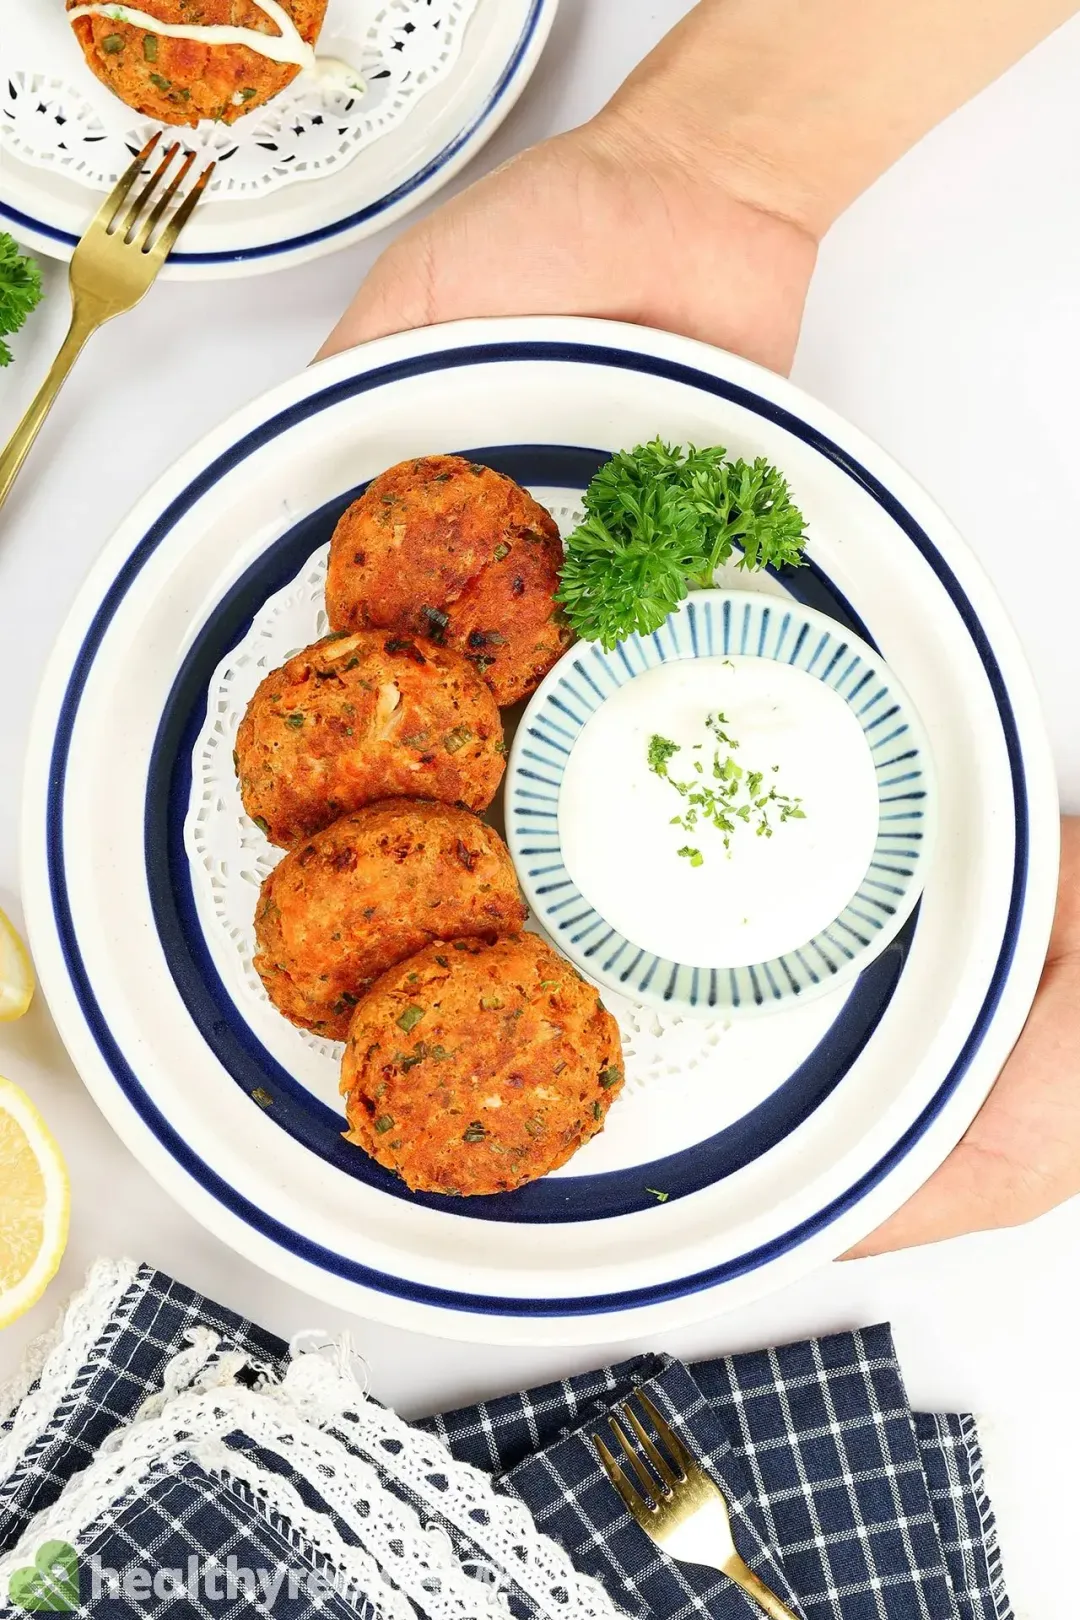 two hand holding a plate of four fried salmon patties with a small bowl of white sauce and some fresh parsley